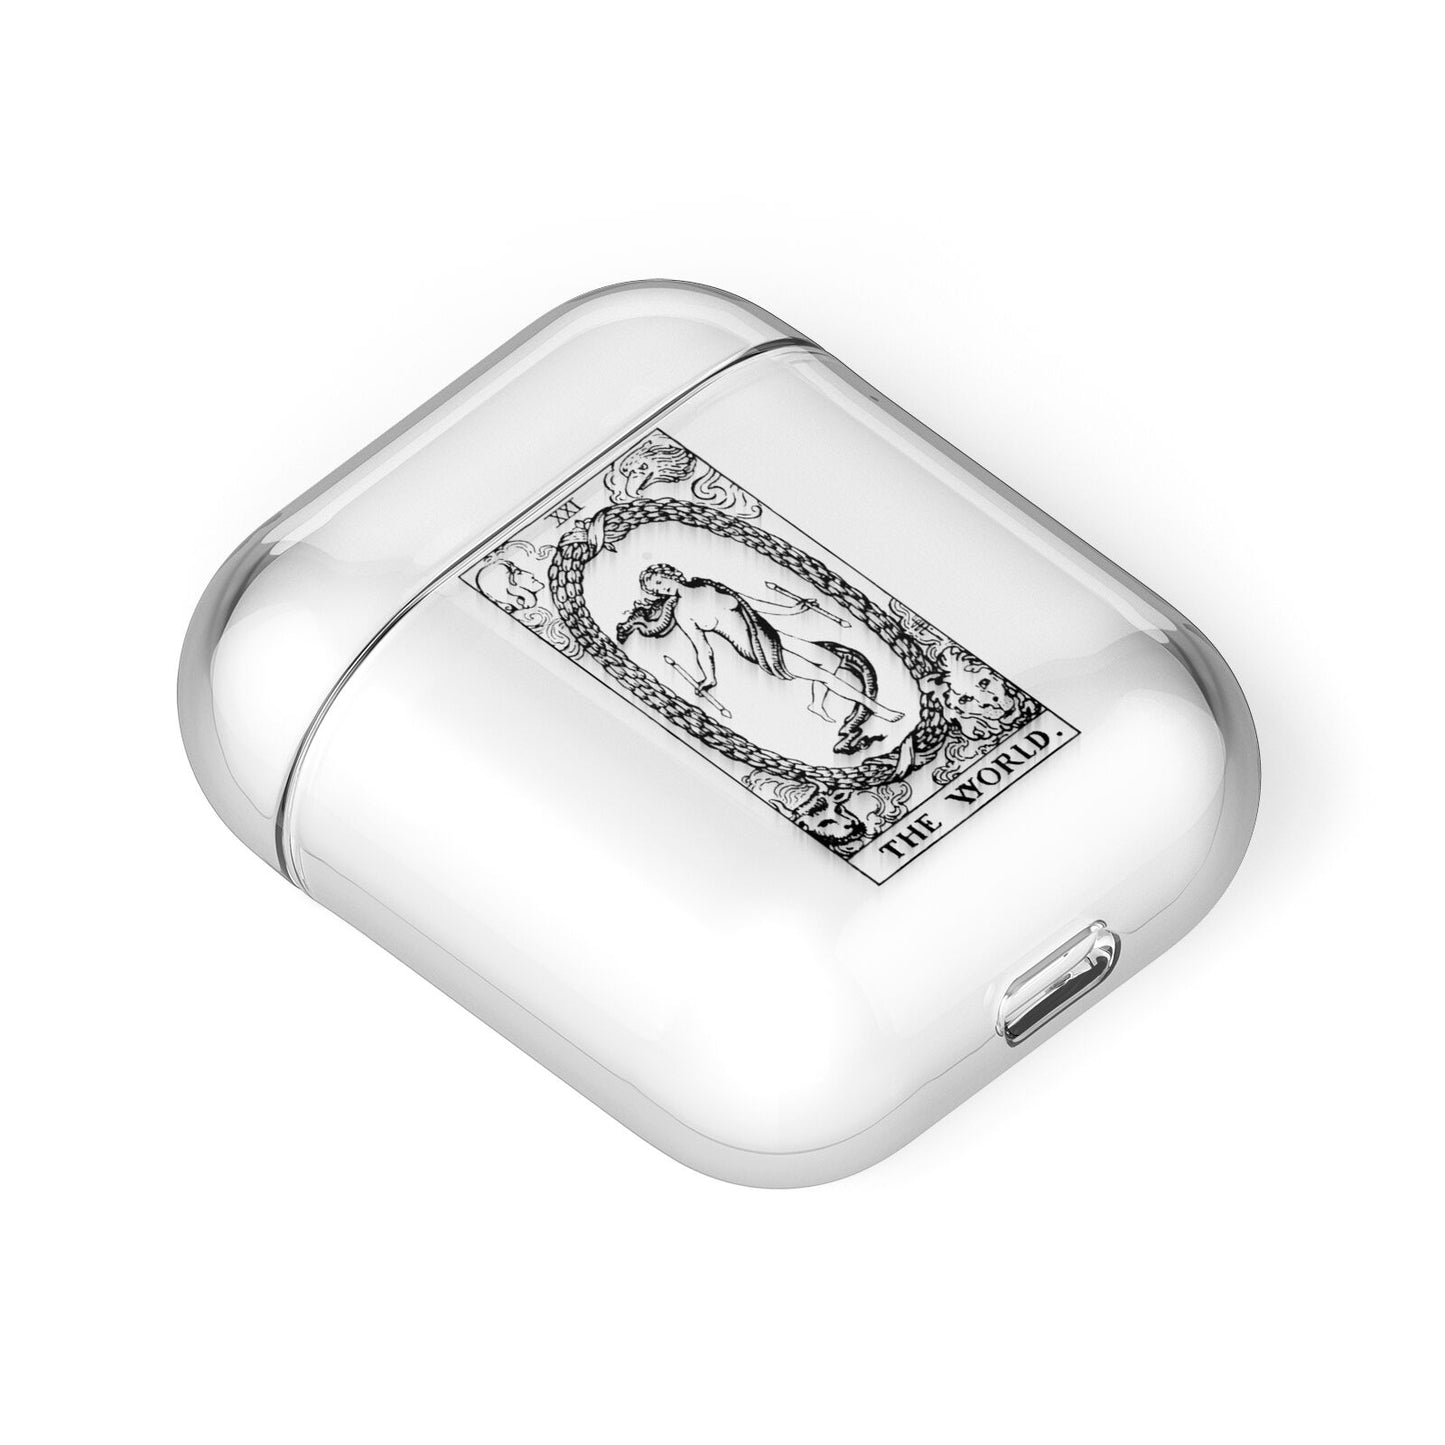 The World Monochrome AirPods Case Laid Flat